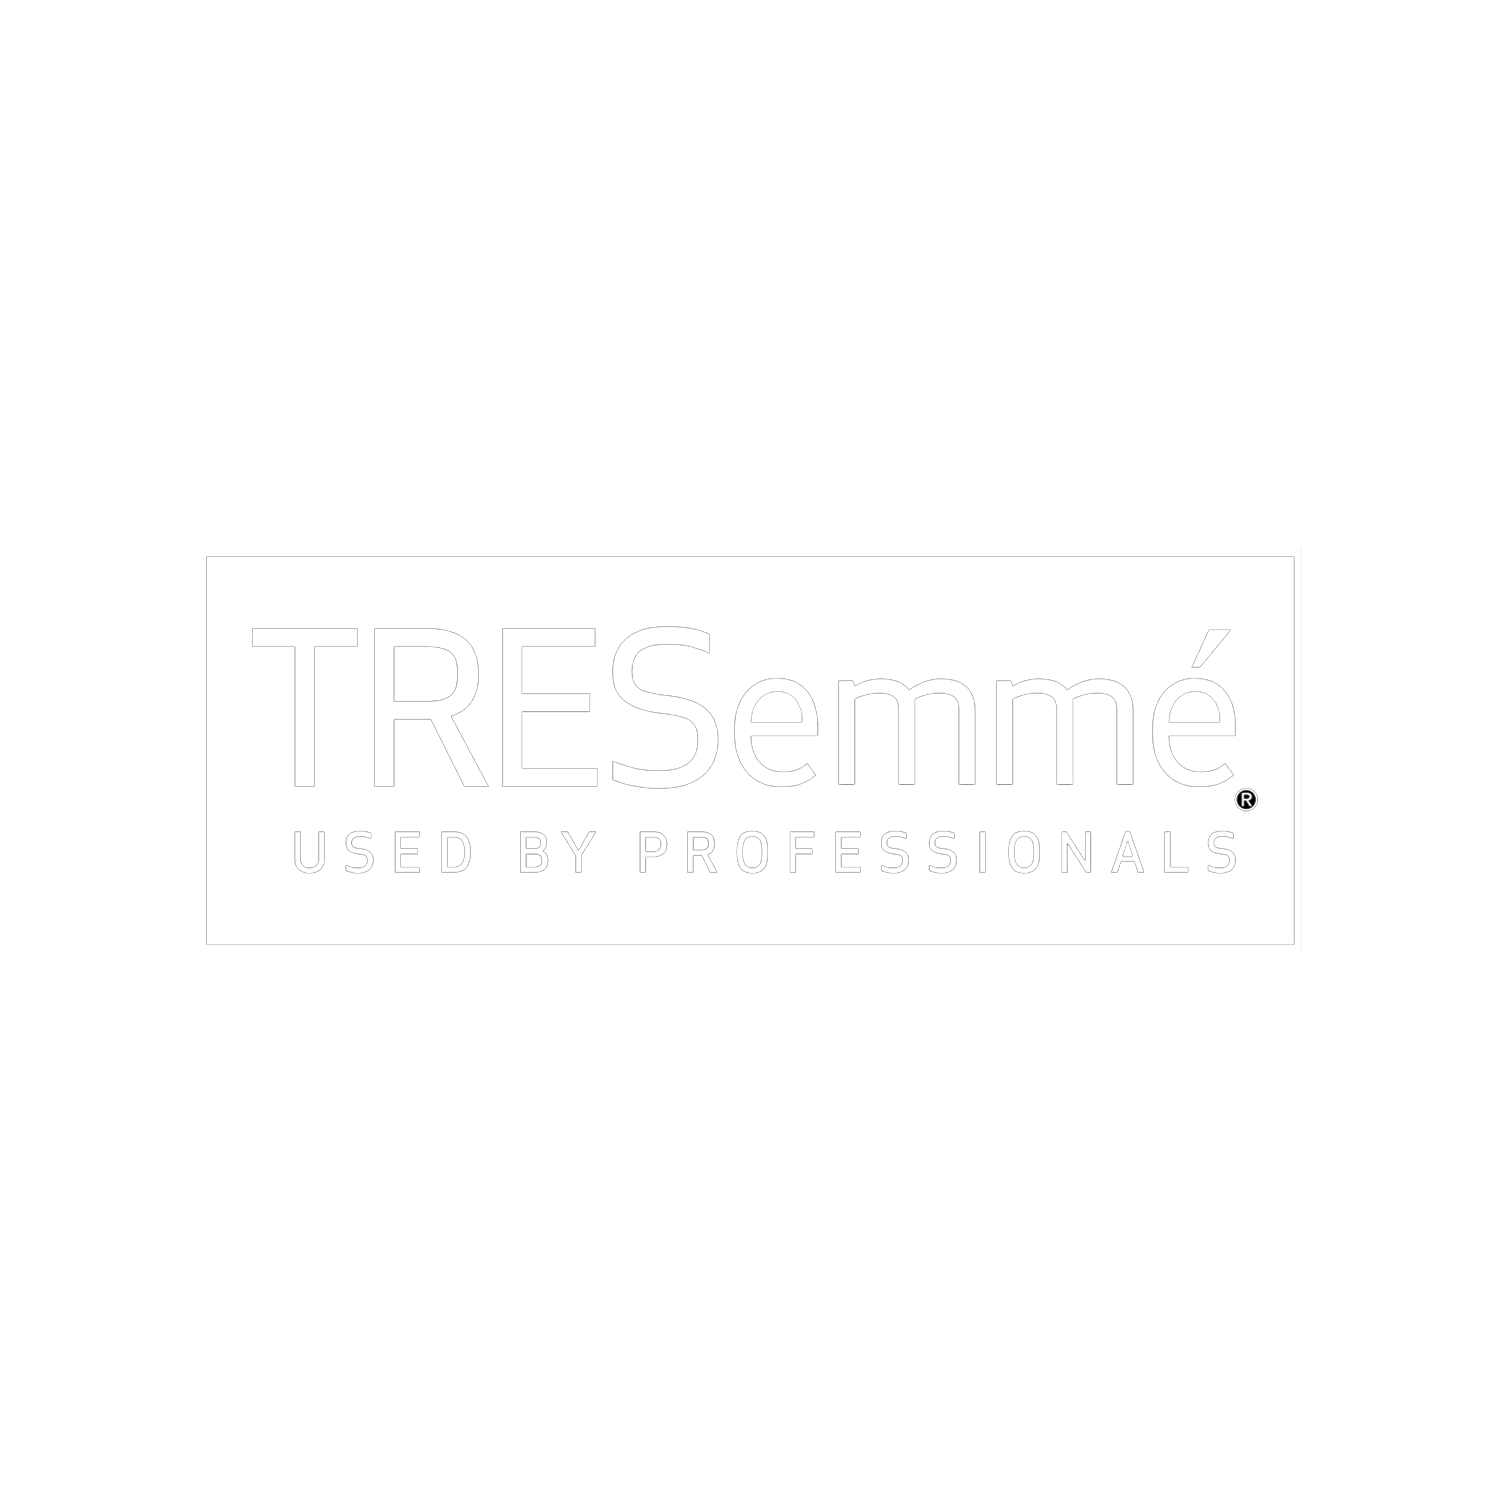 00__0012_Tresemme.png